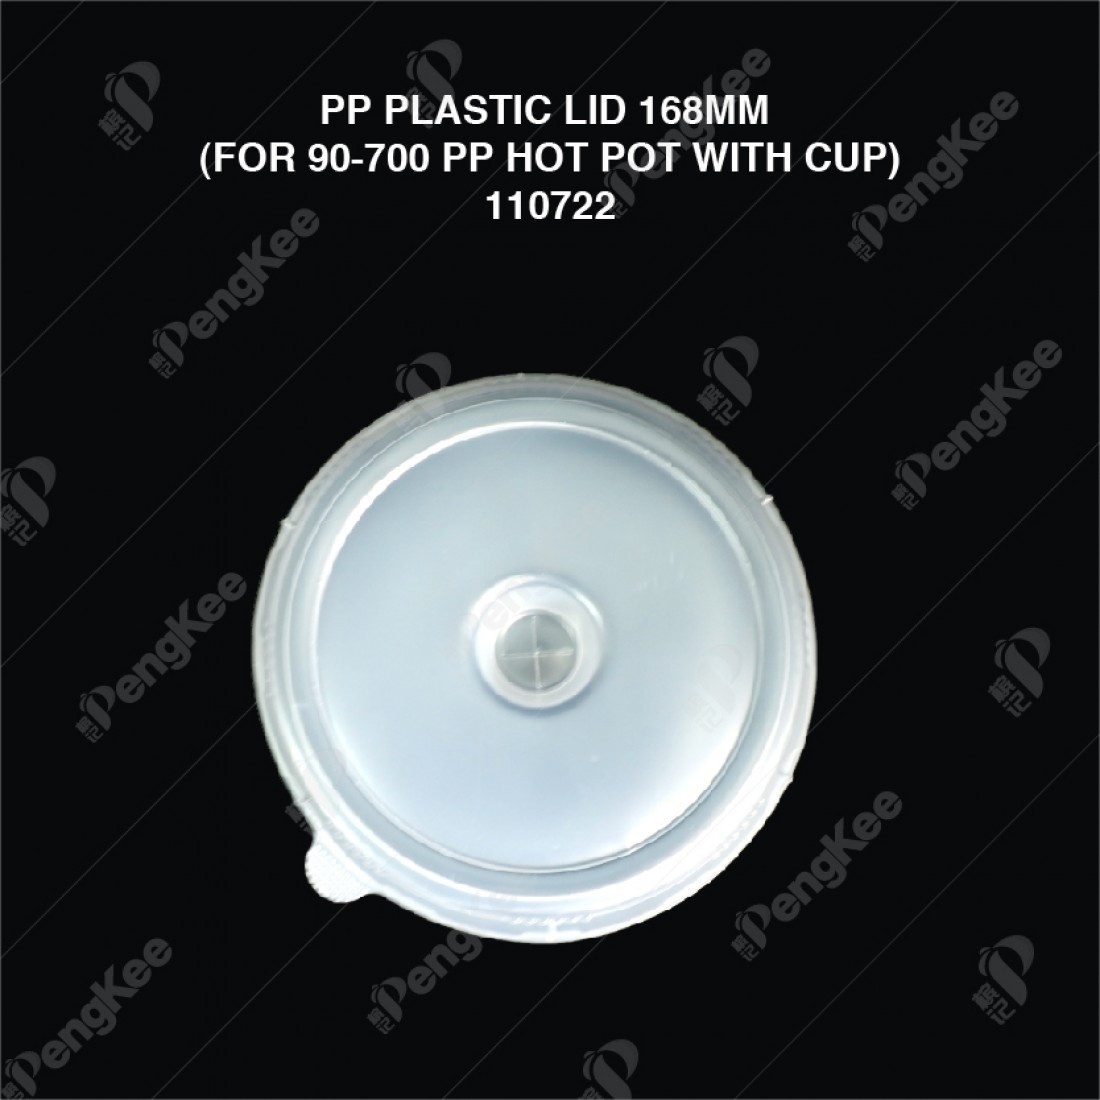 "PP PLASTIC LID 168MM (FOR 90-700 PP HOT POT WITH CUP) 